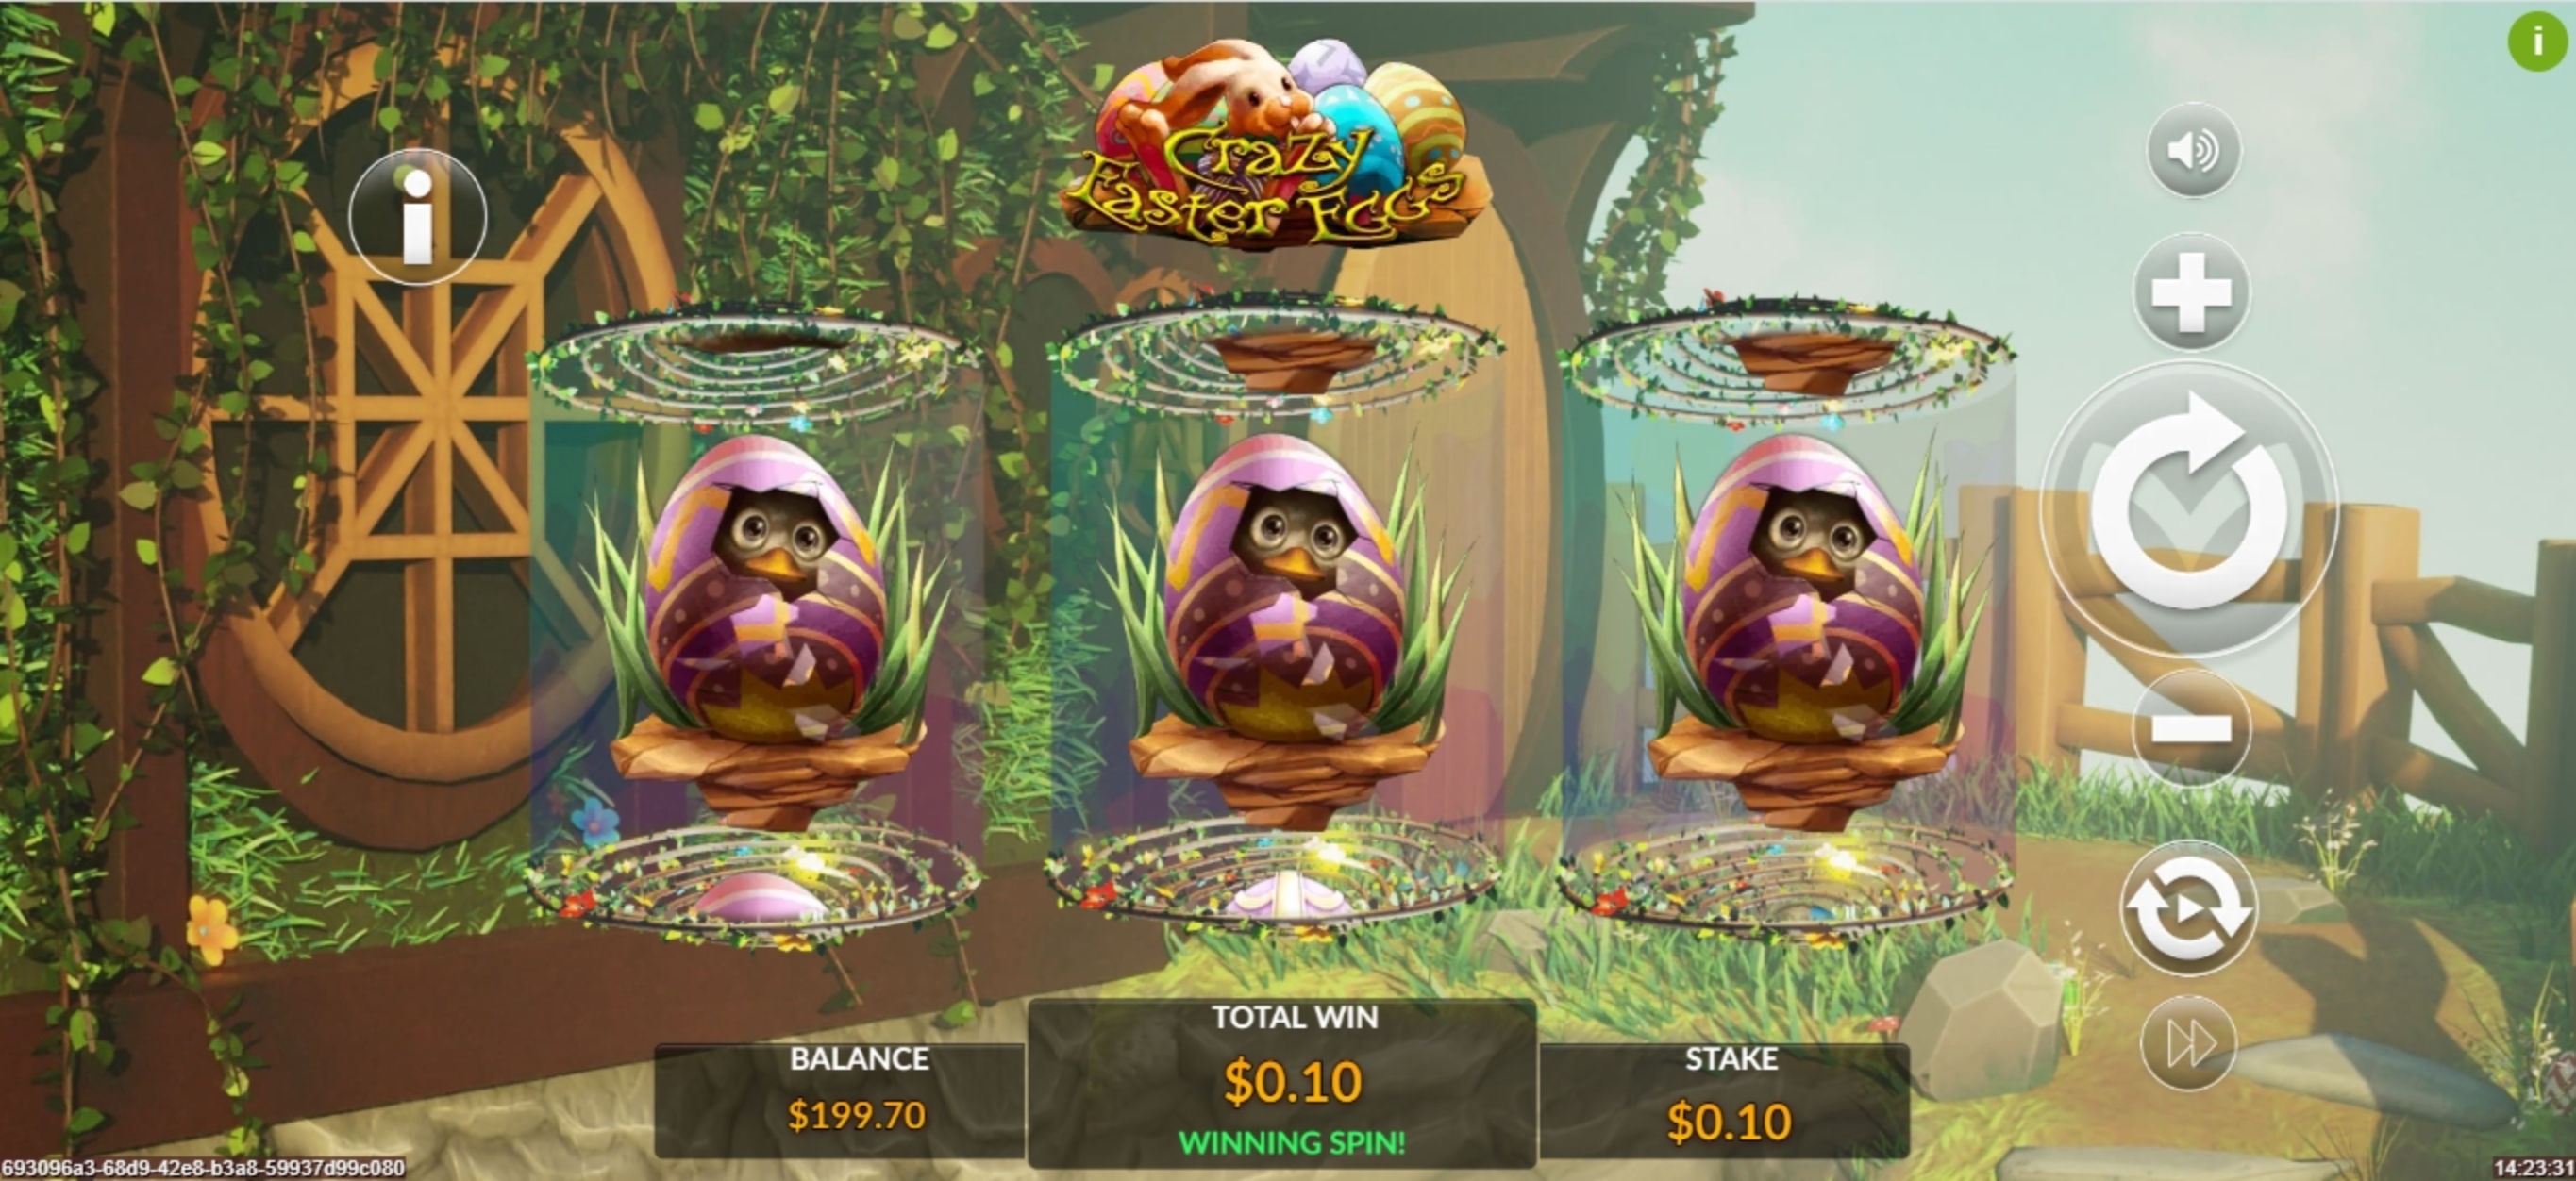 Win Money in Crazy Easter Eggs Free Slot Game by Maverick